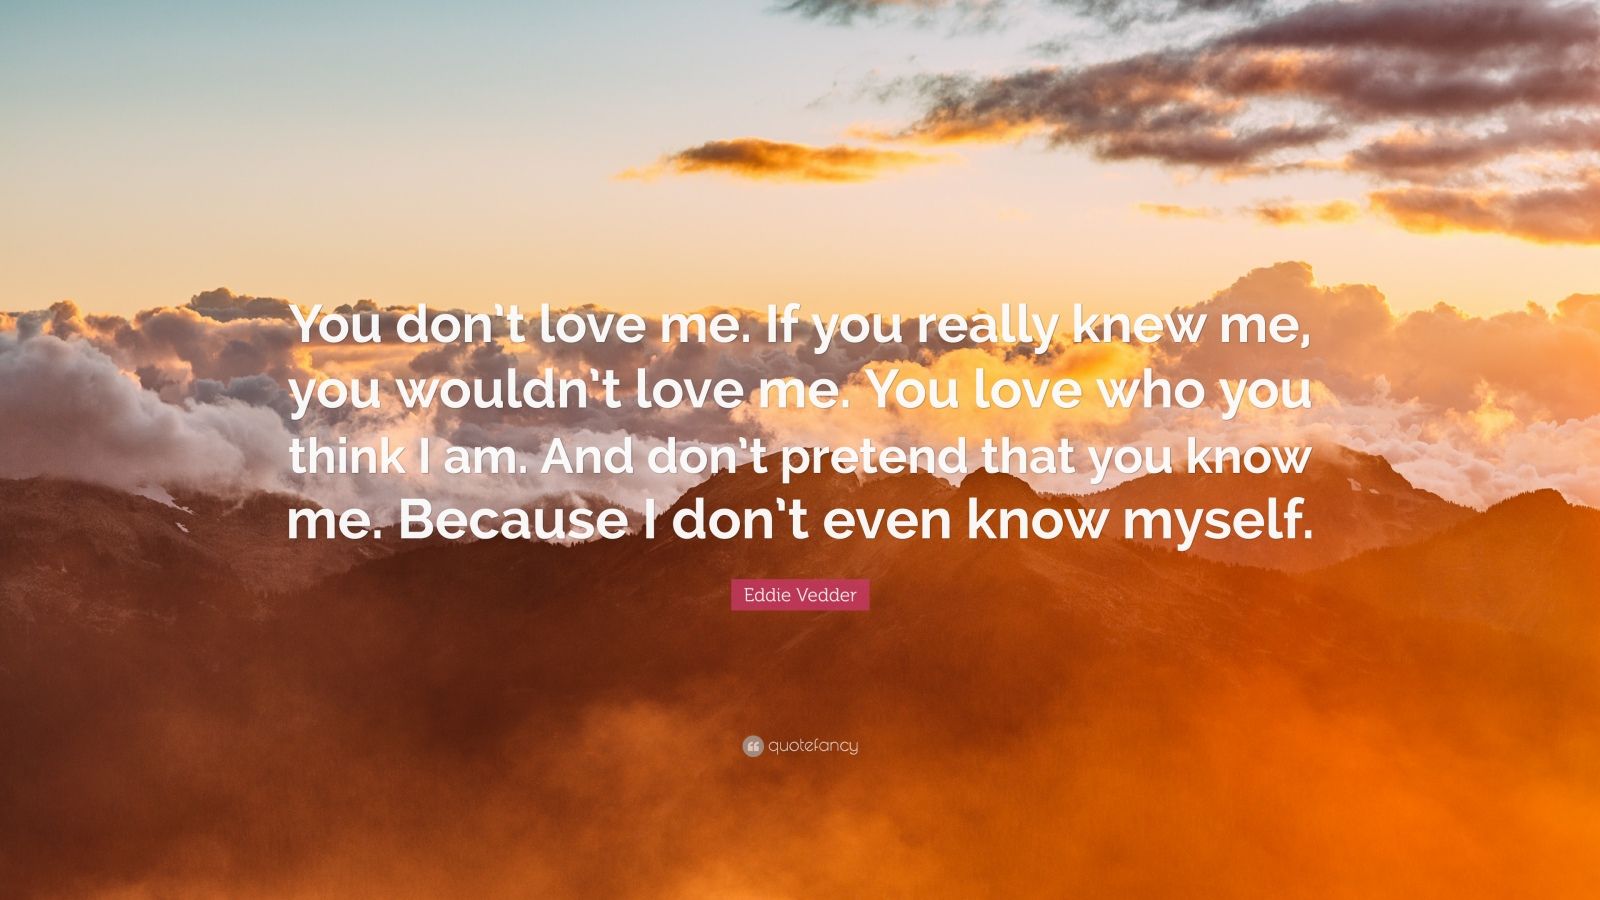 Eddie Vedder Quote: “You don’t love me. If you really knew me, you ...